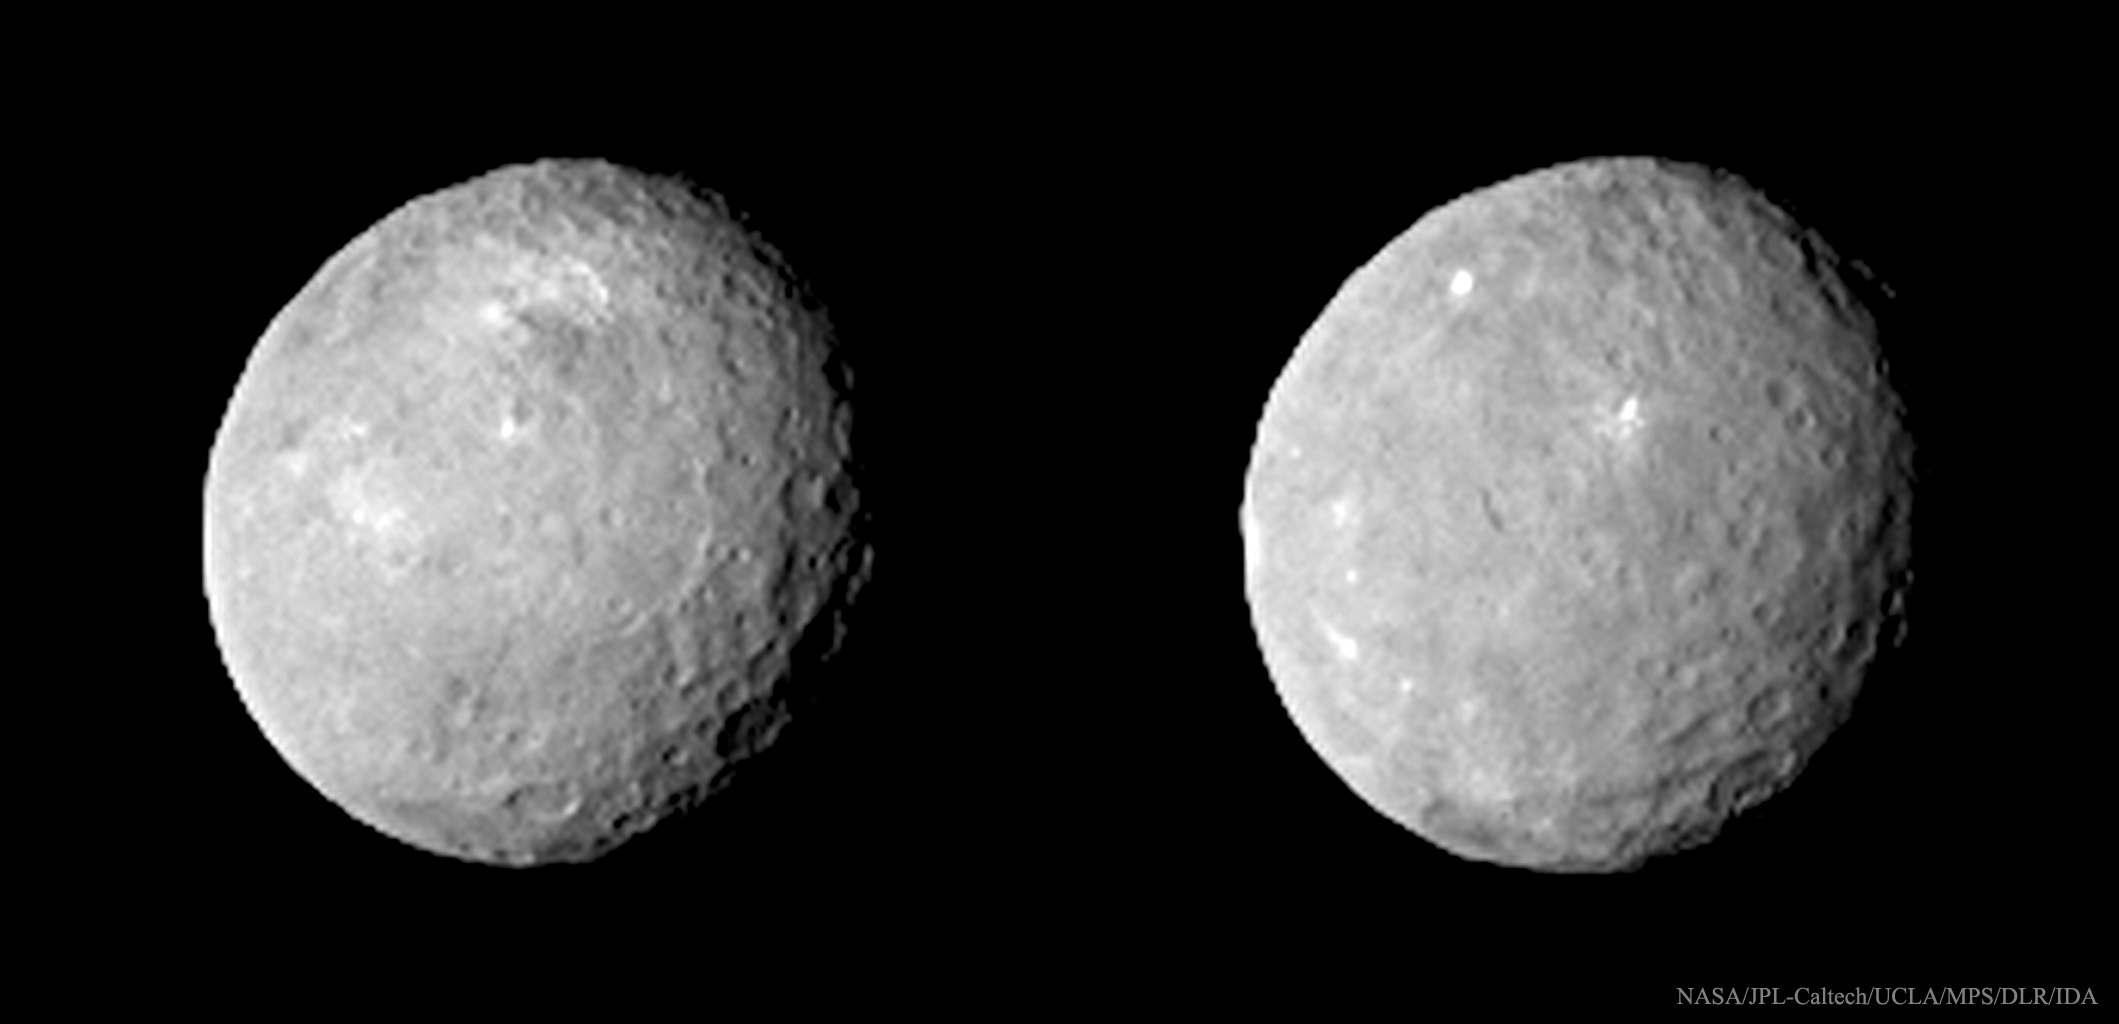 Dark Craters and Bright Spots Revealed on Asteroid Ceres